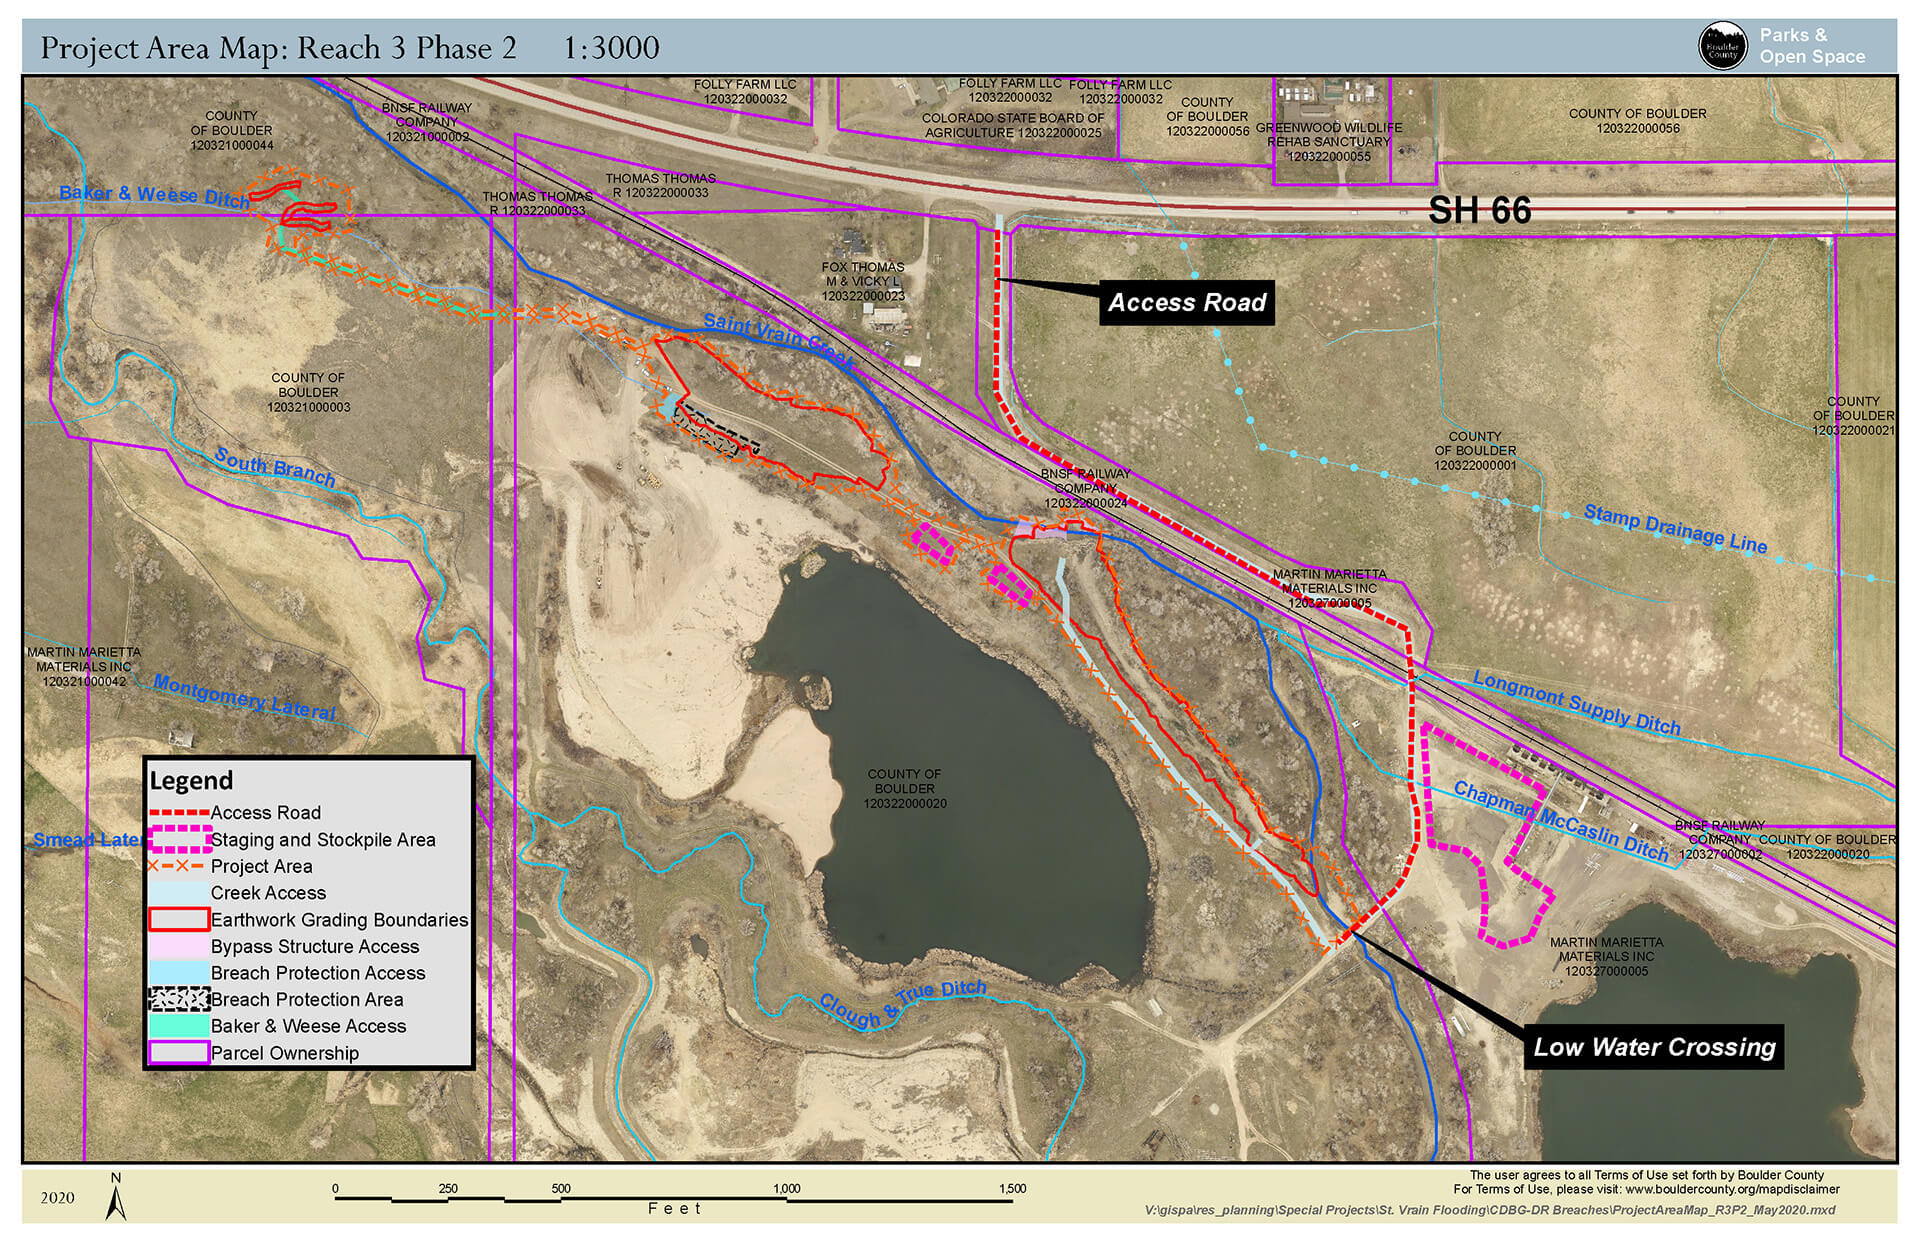 St. Vrain Creek Reach 3 Phase 2 Project Area Map